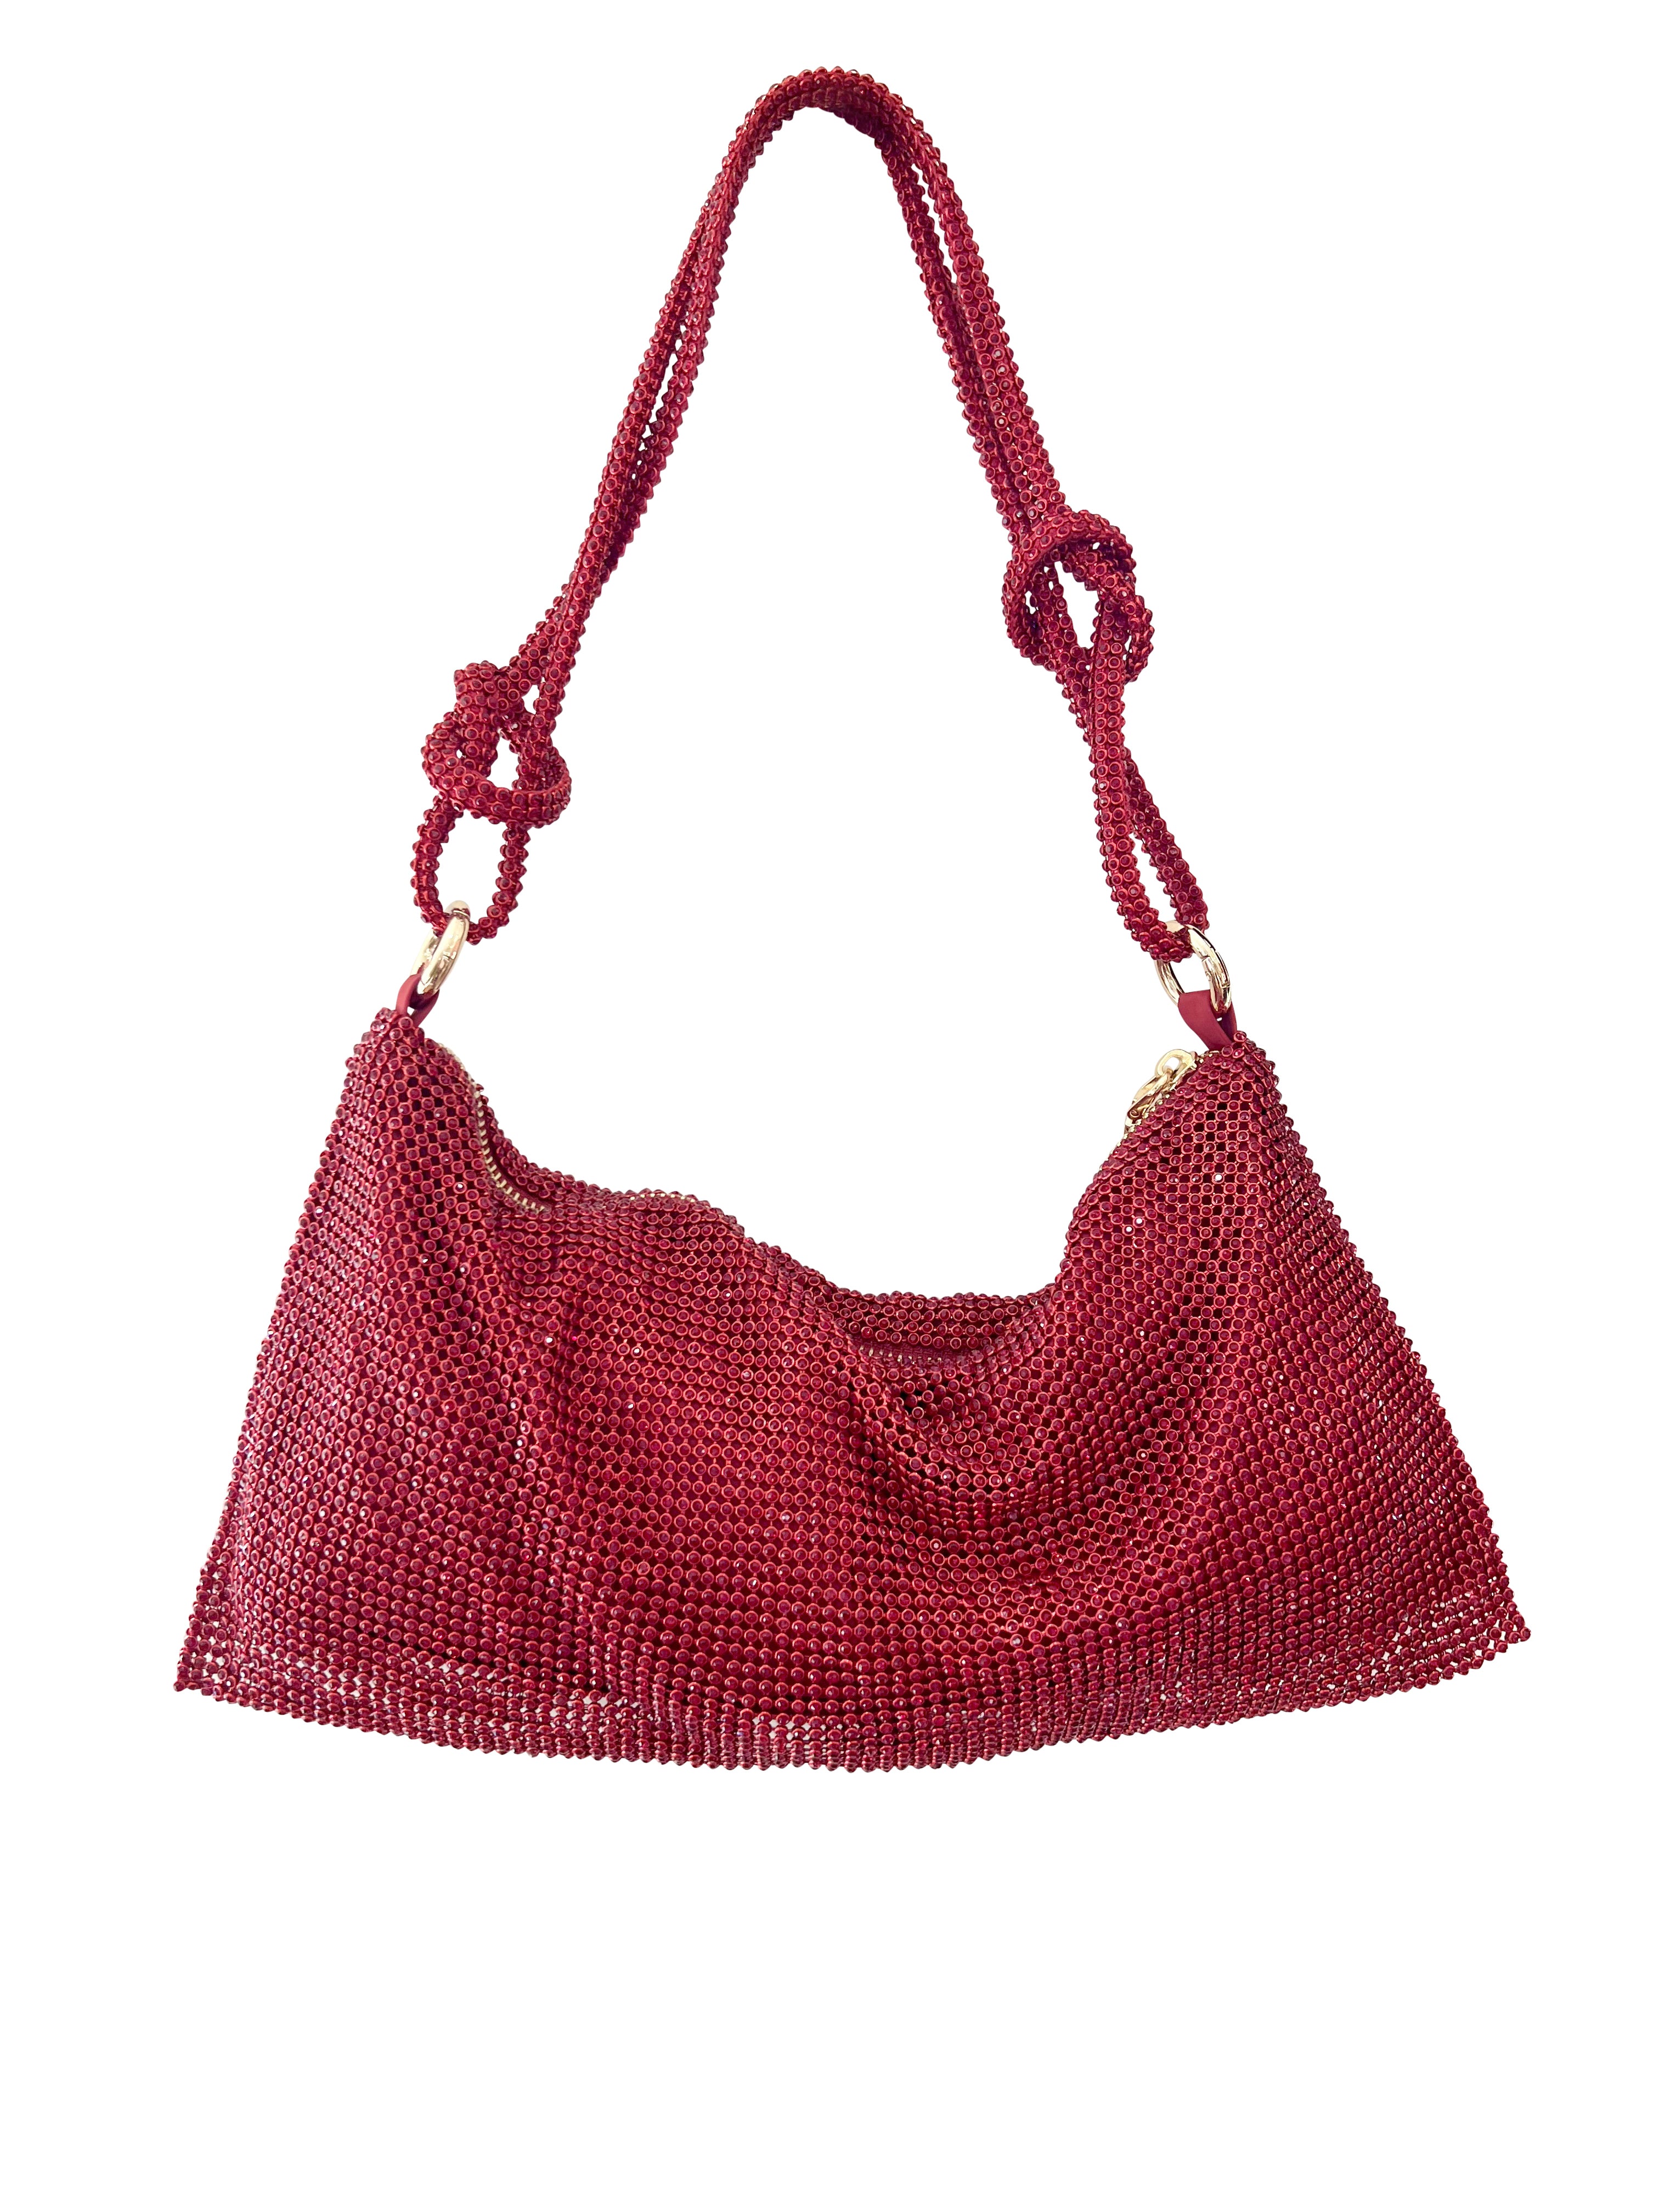 Party Bag in Red